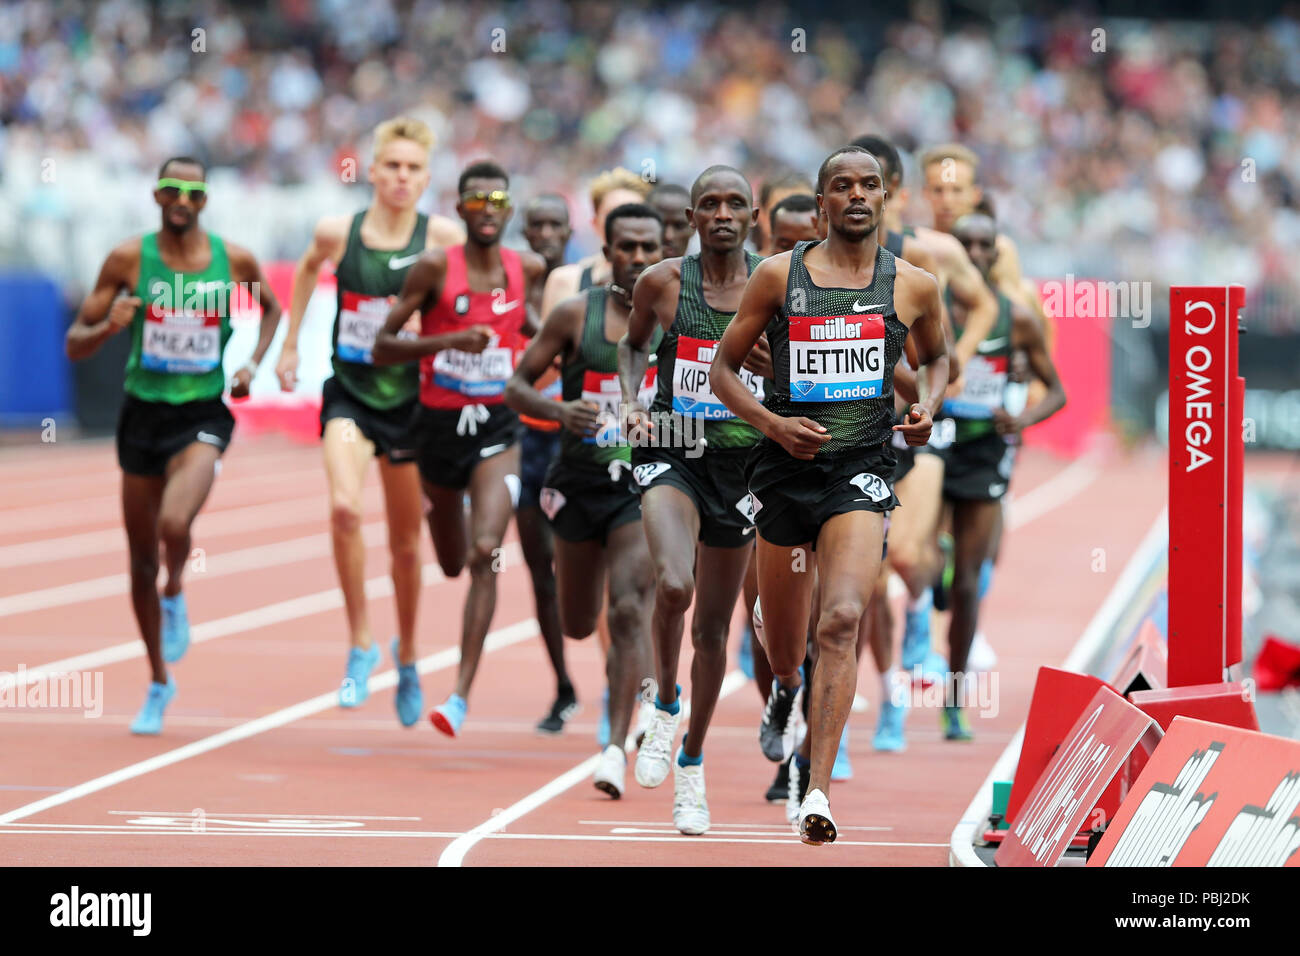 Vincent LETTING (Kenya) competing in the Men's 5000m Final at the 2018, IAAF Diamond League, Anniversary Games, Queen Elizabeth Olympic Park, Stratford, London, UK. Stock Photo